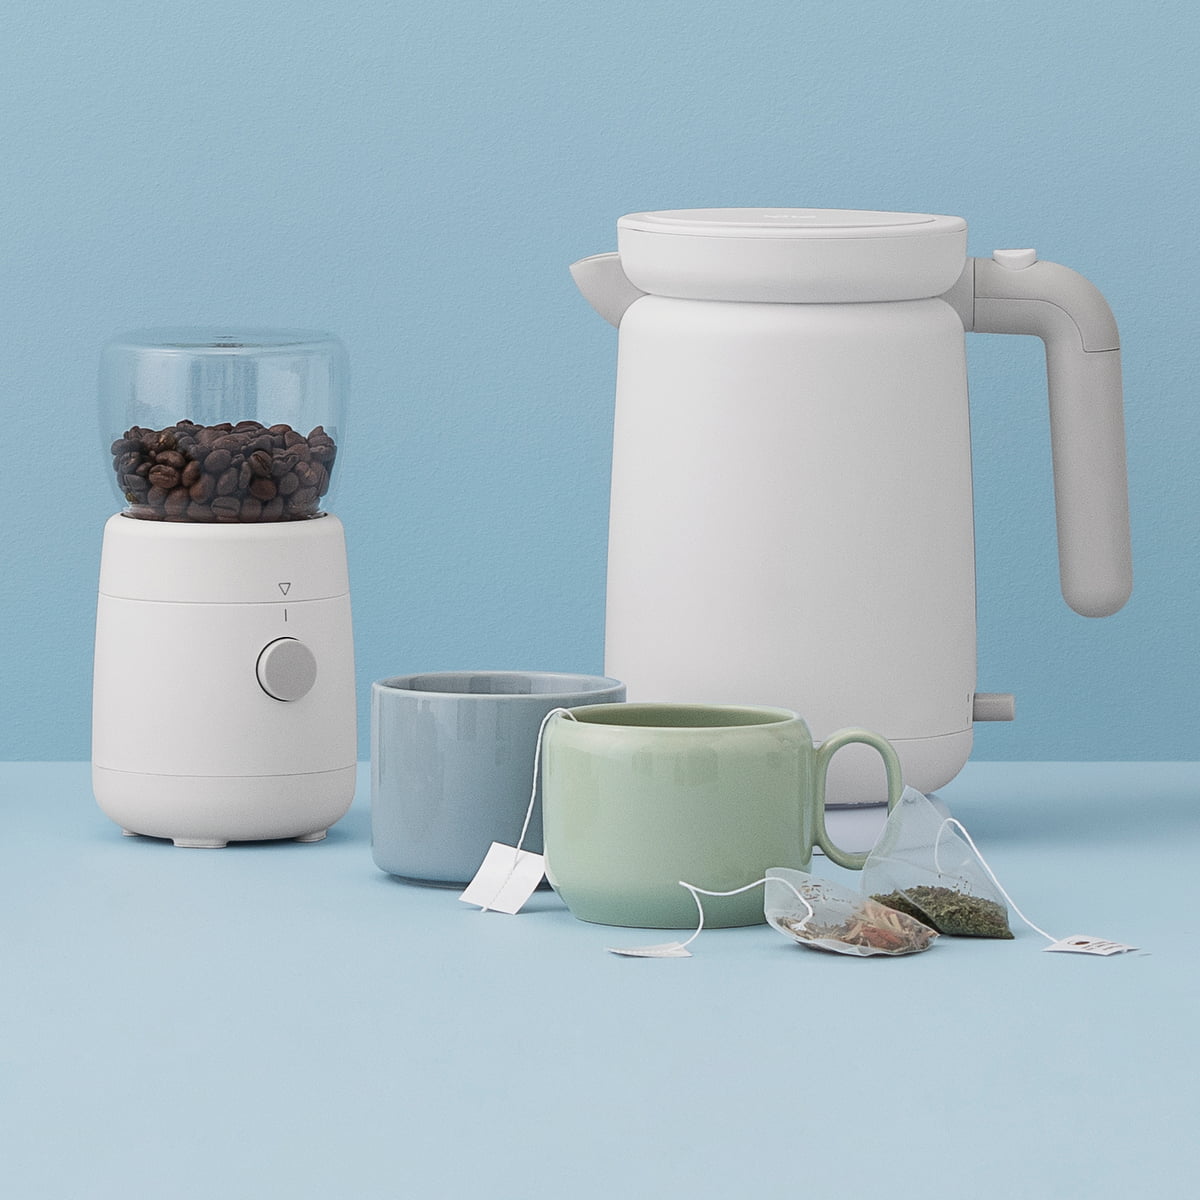 Rig-Tig by Stelton - Foodie Milk frother